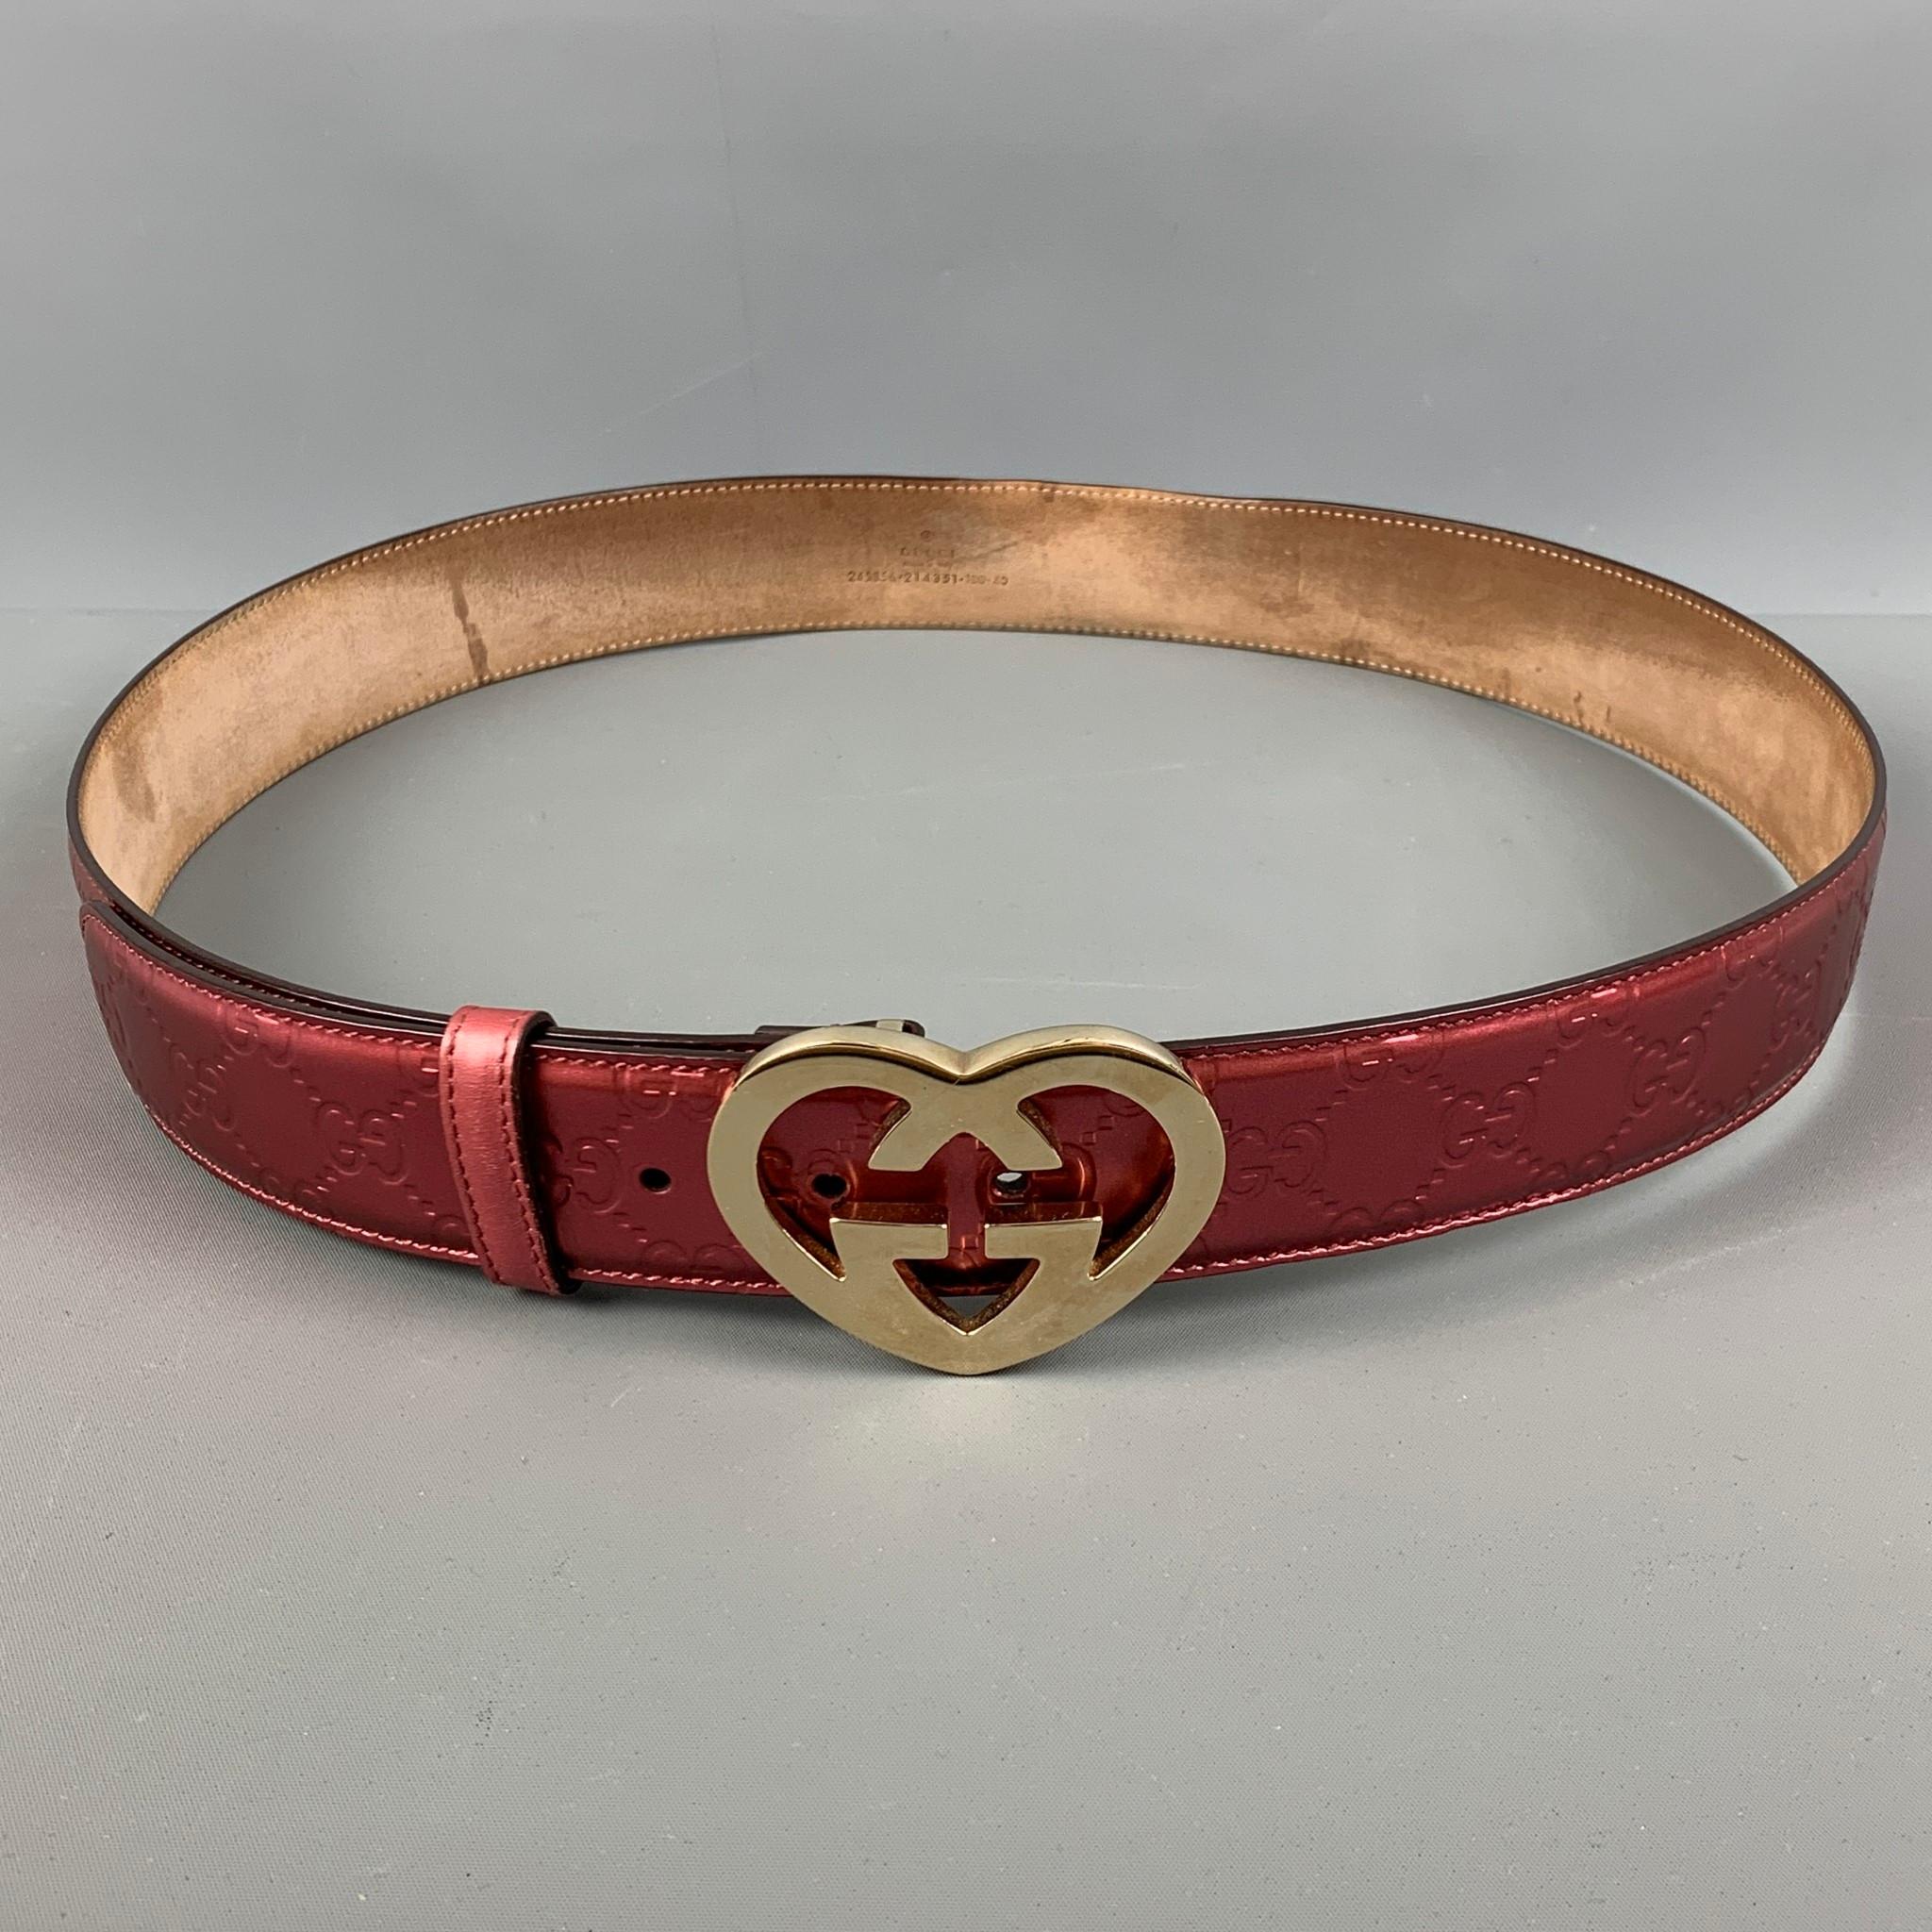 GUCCI 'Guccisima Interlocking' belt comes in a pink embossed GG details featuring a gold tone heart shape buckle. Made in Italy.

Good Pre-Owned Conditions. As- Is.
Marked: 245856 214351 100 40

Length: 44 in.
Width: 1.5 in.
Fits: 35 in. - 40